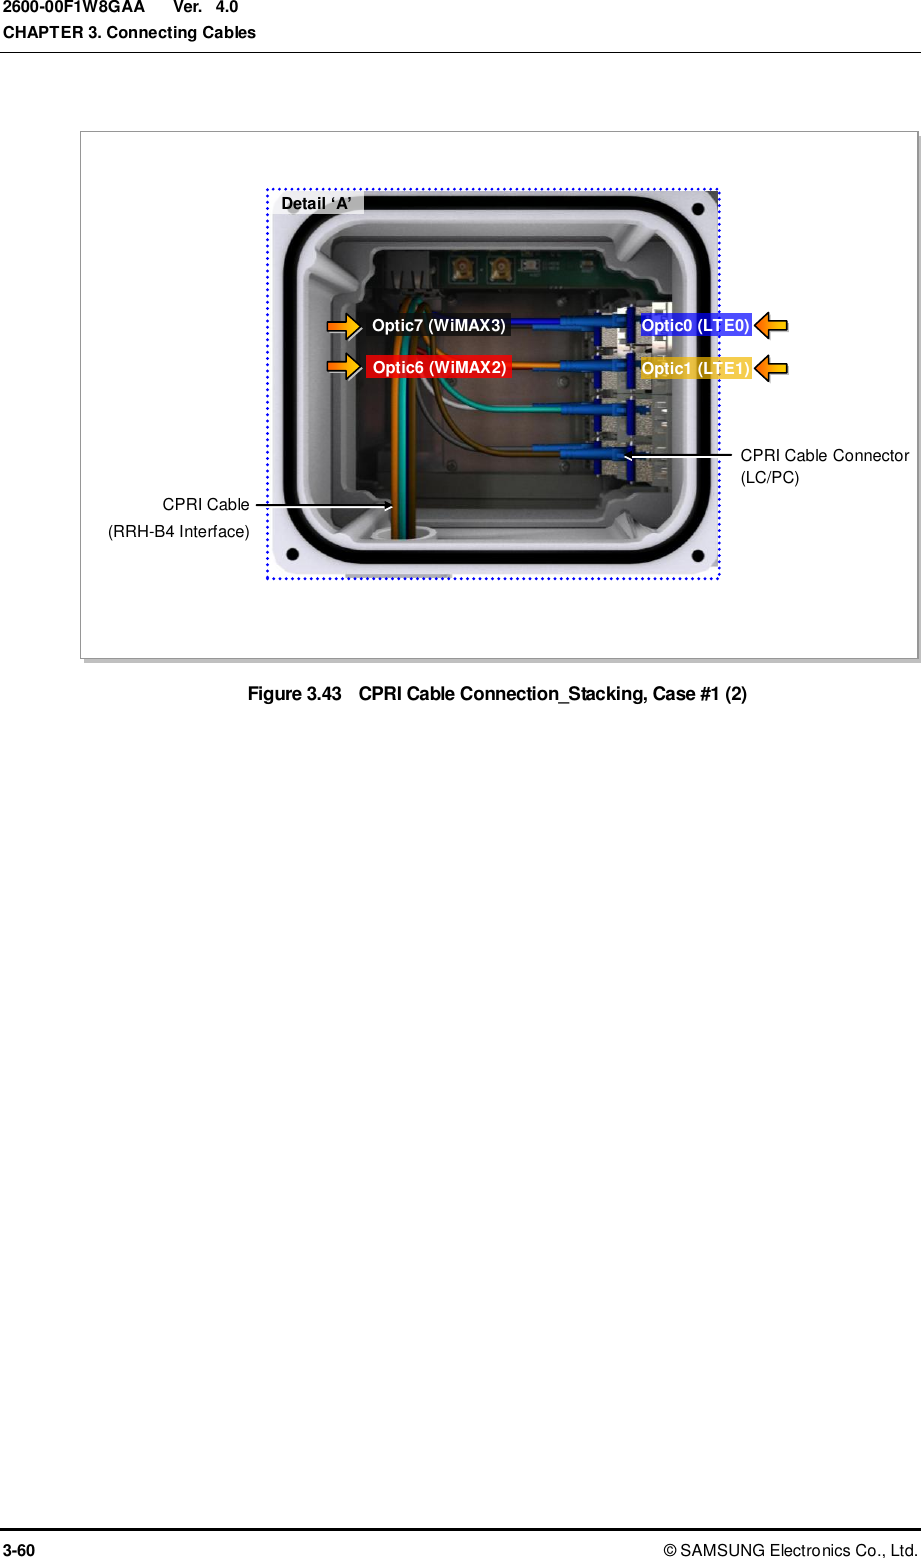  Ver.  CHAPTER 3. Connecting Cables 3-60 ©  SAMSUNG Electronics Co., Ltd. 2600-00F1W8GAA 4.0  Figure 3.43  CPRI Cable Connection_Stacking, Case #1 (2)  Detail ‘A’ CPRI Cable (RRH-B4 Interface) CPRI Cable Connector (LC/PC) Optic0 (LTE0) Optic1 (LTE1) Optic6 (WiMAX2) Optic7 (WiMAX3) 